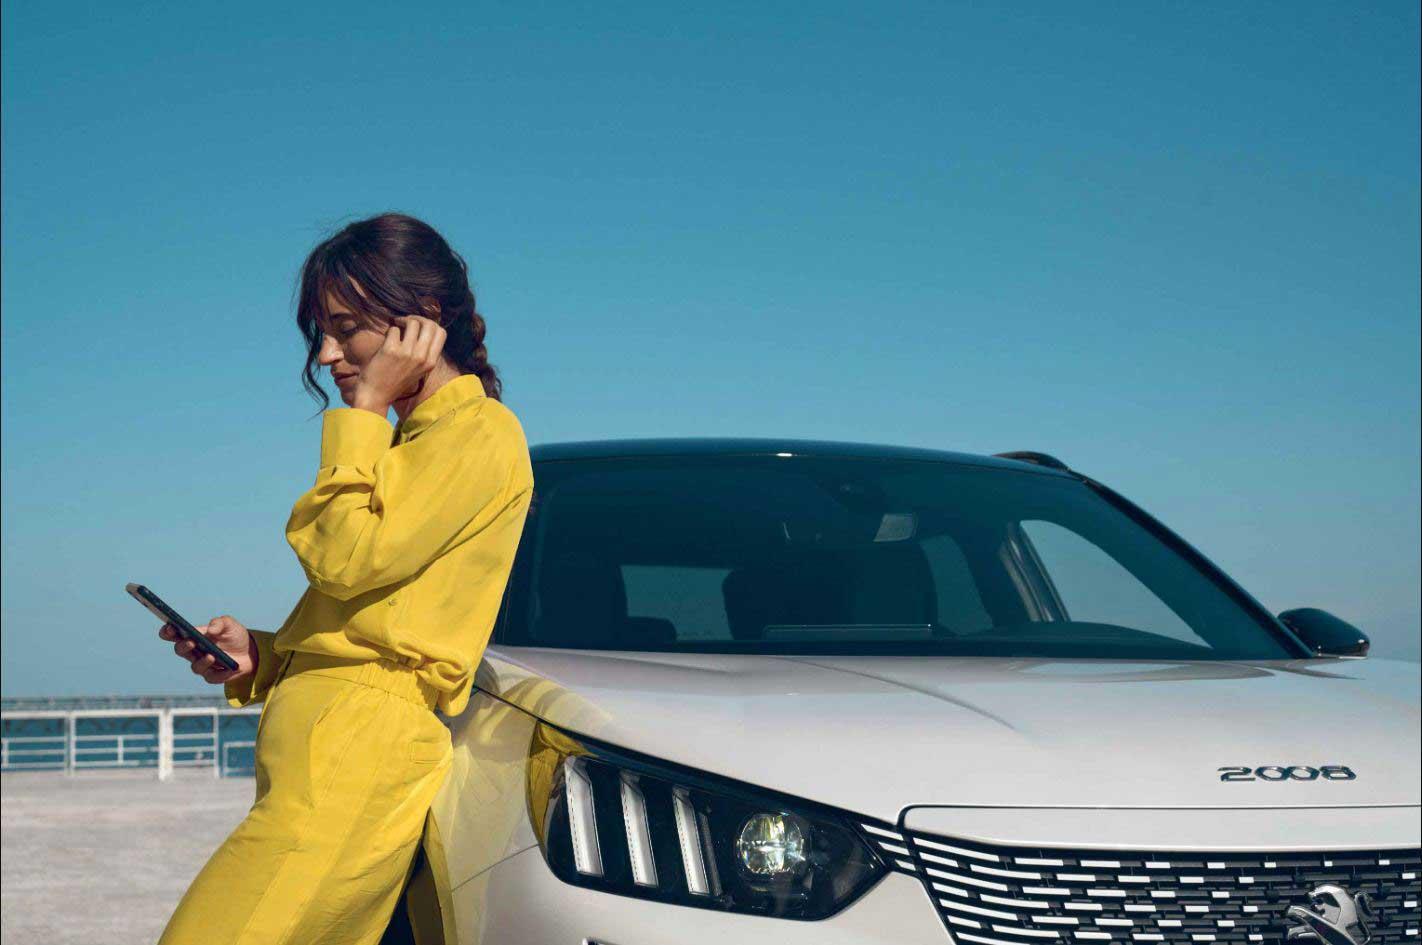 A lady is leaning on a white Peugeot 2008 while on her phone